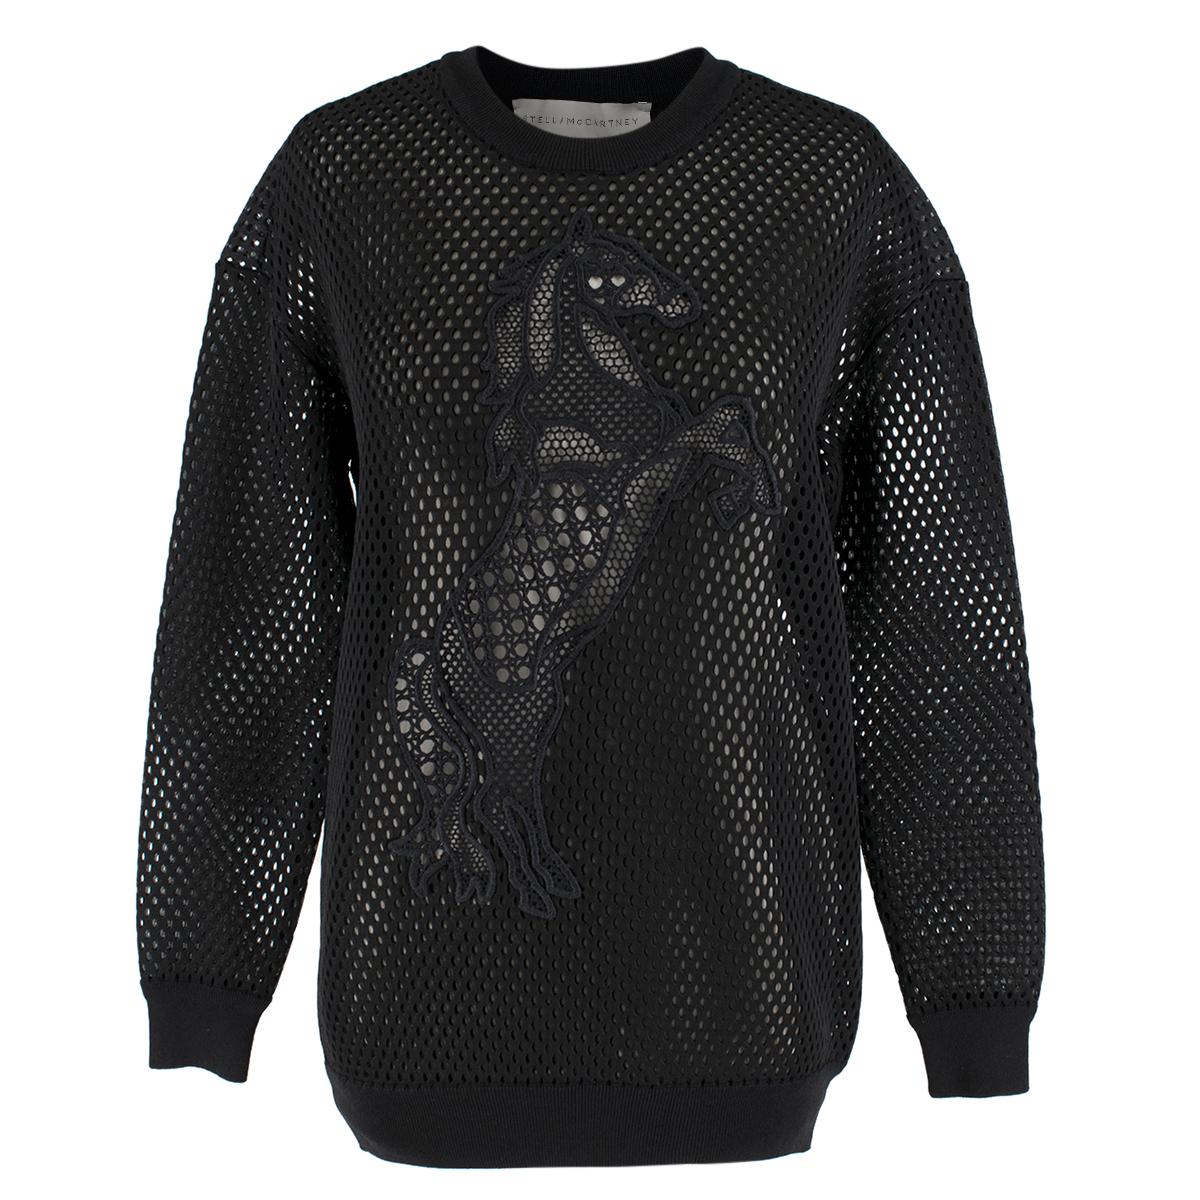 Stella McCartney Black Mesh Neoprene Horse Print Jumper  

- black mesh jumper
- horse print embellished to the front
- round neckline 
- see-through
- relaxed fit

Please note, these items are pre-owned and may show some signs of storage, even when